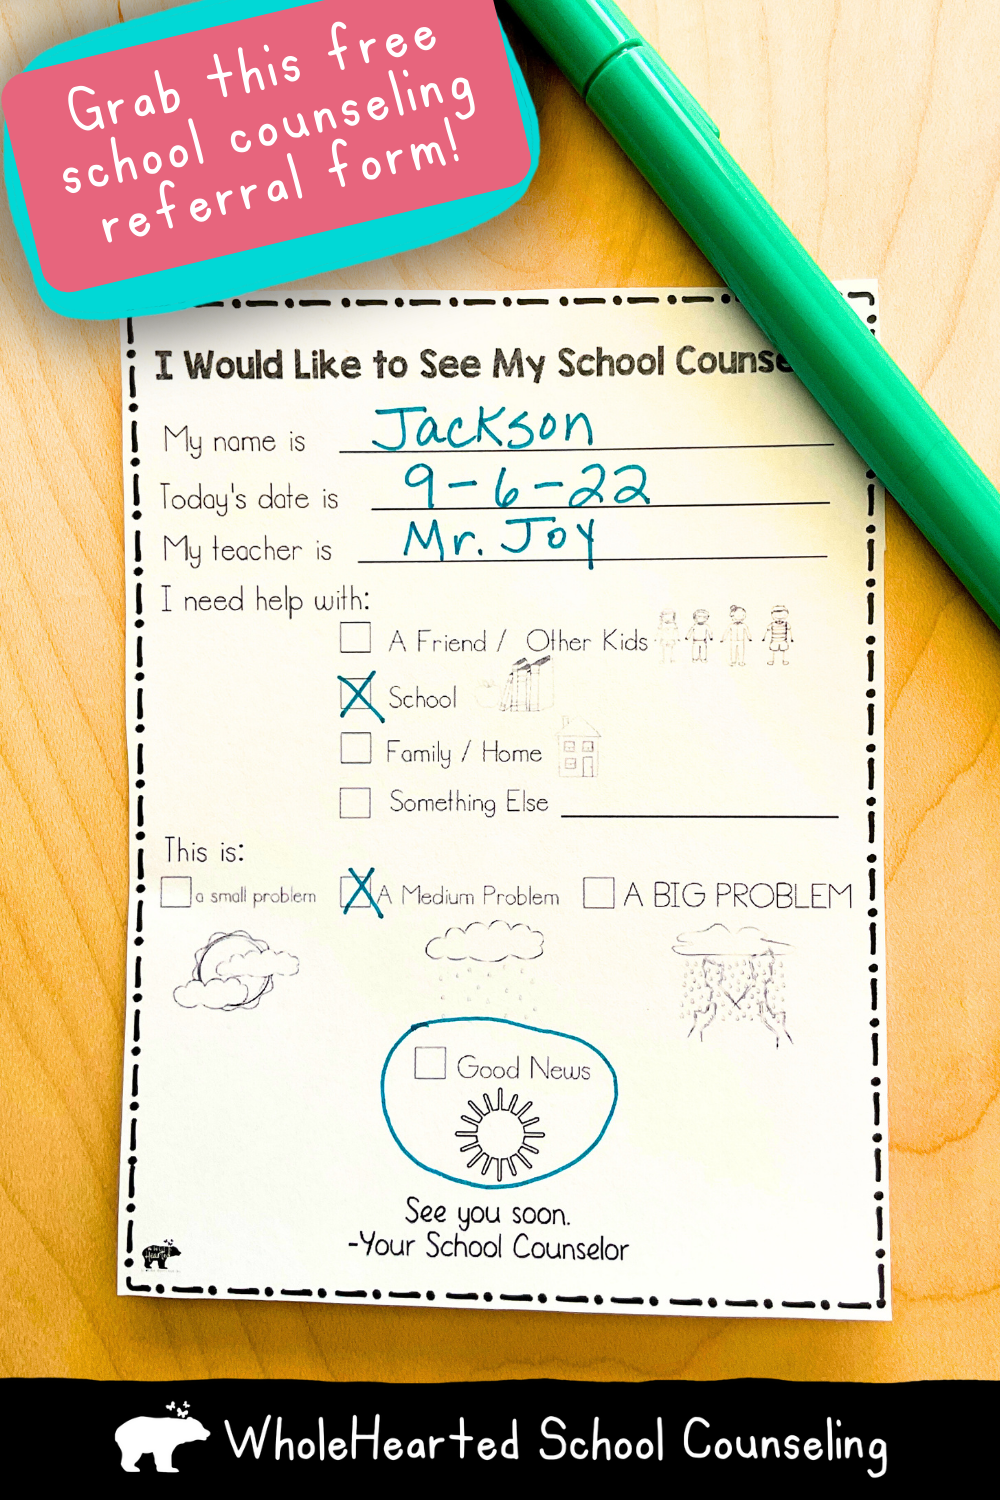 School Counseling referral form on clipboard with blue pen.